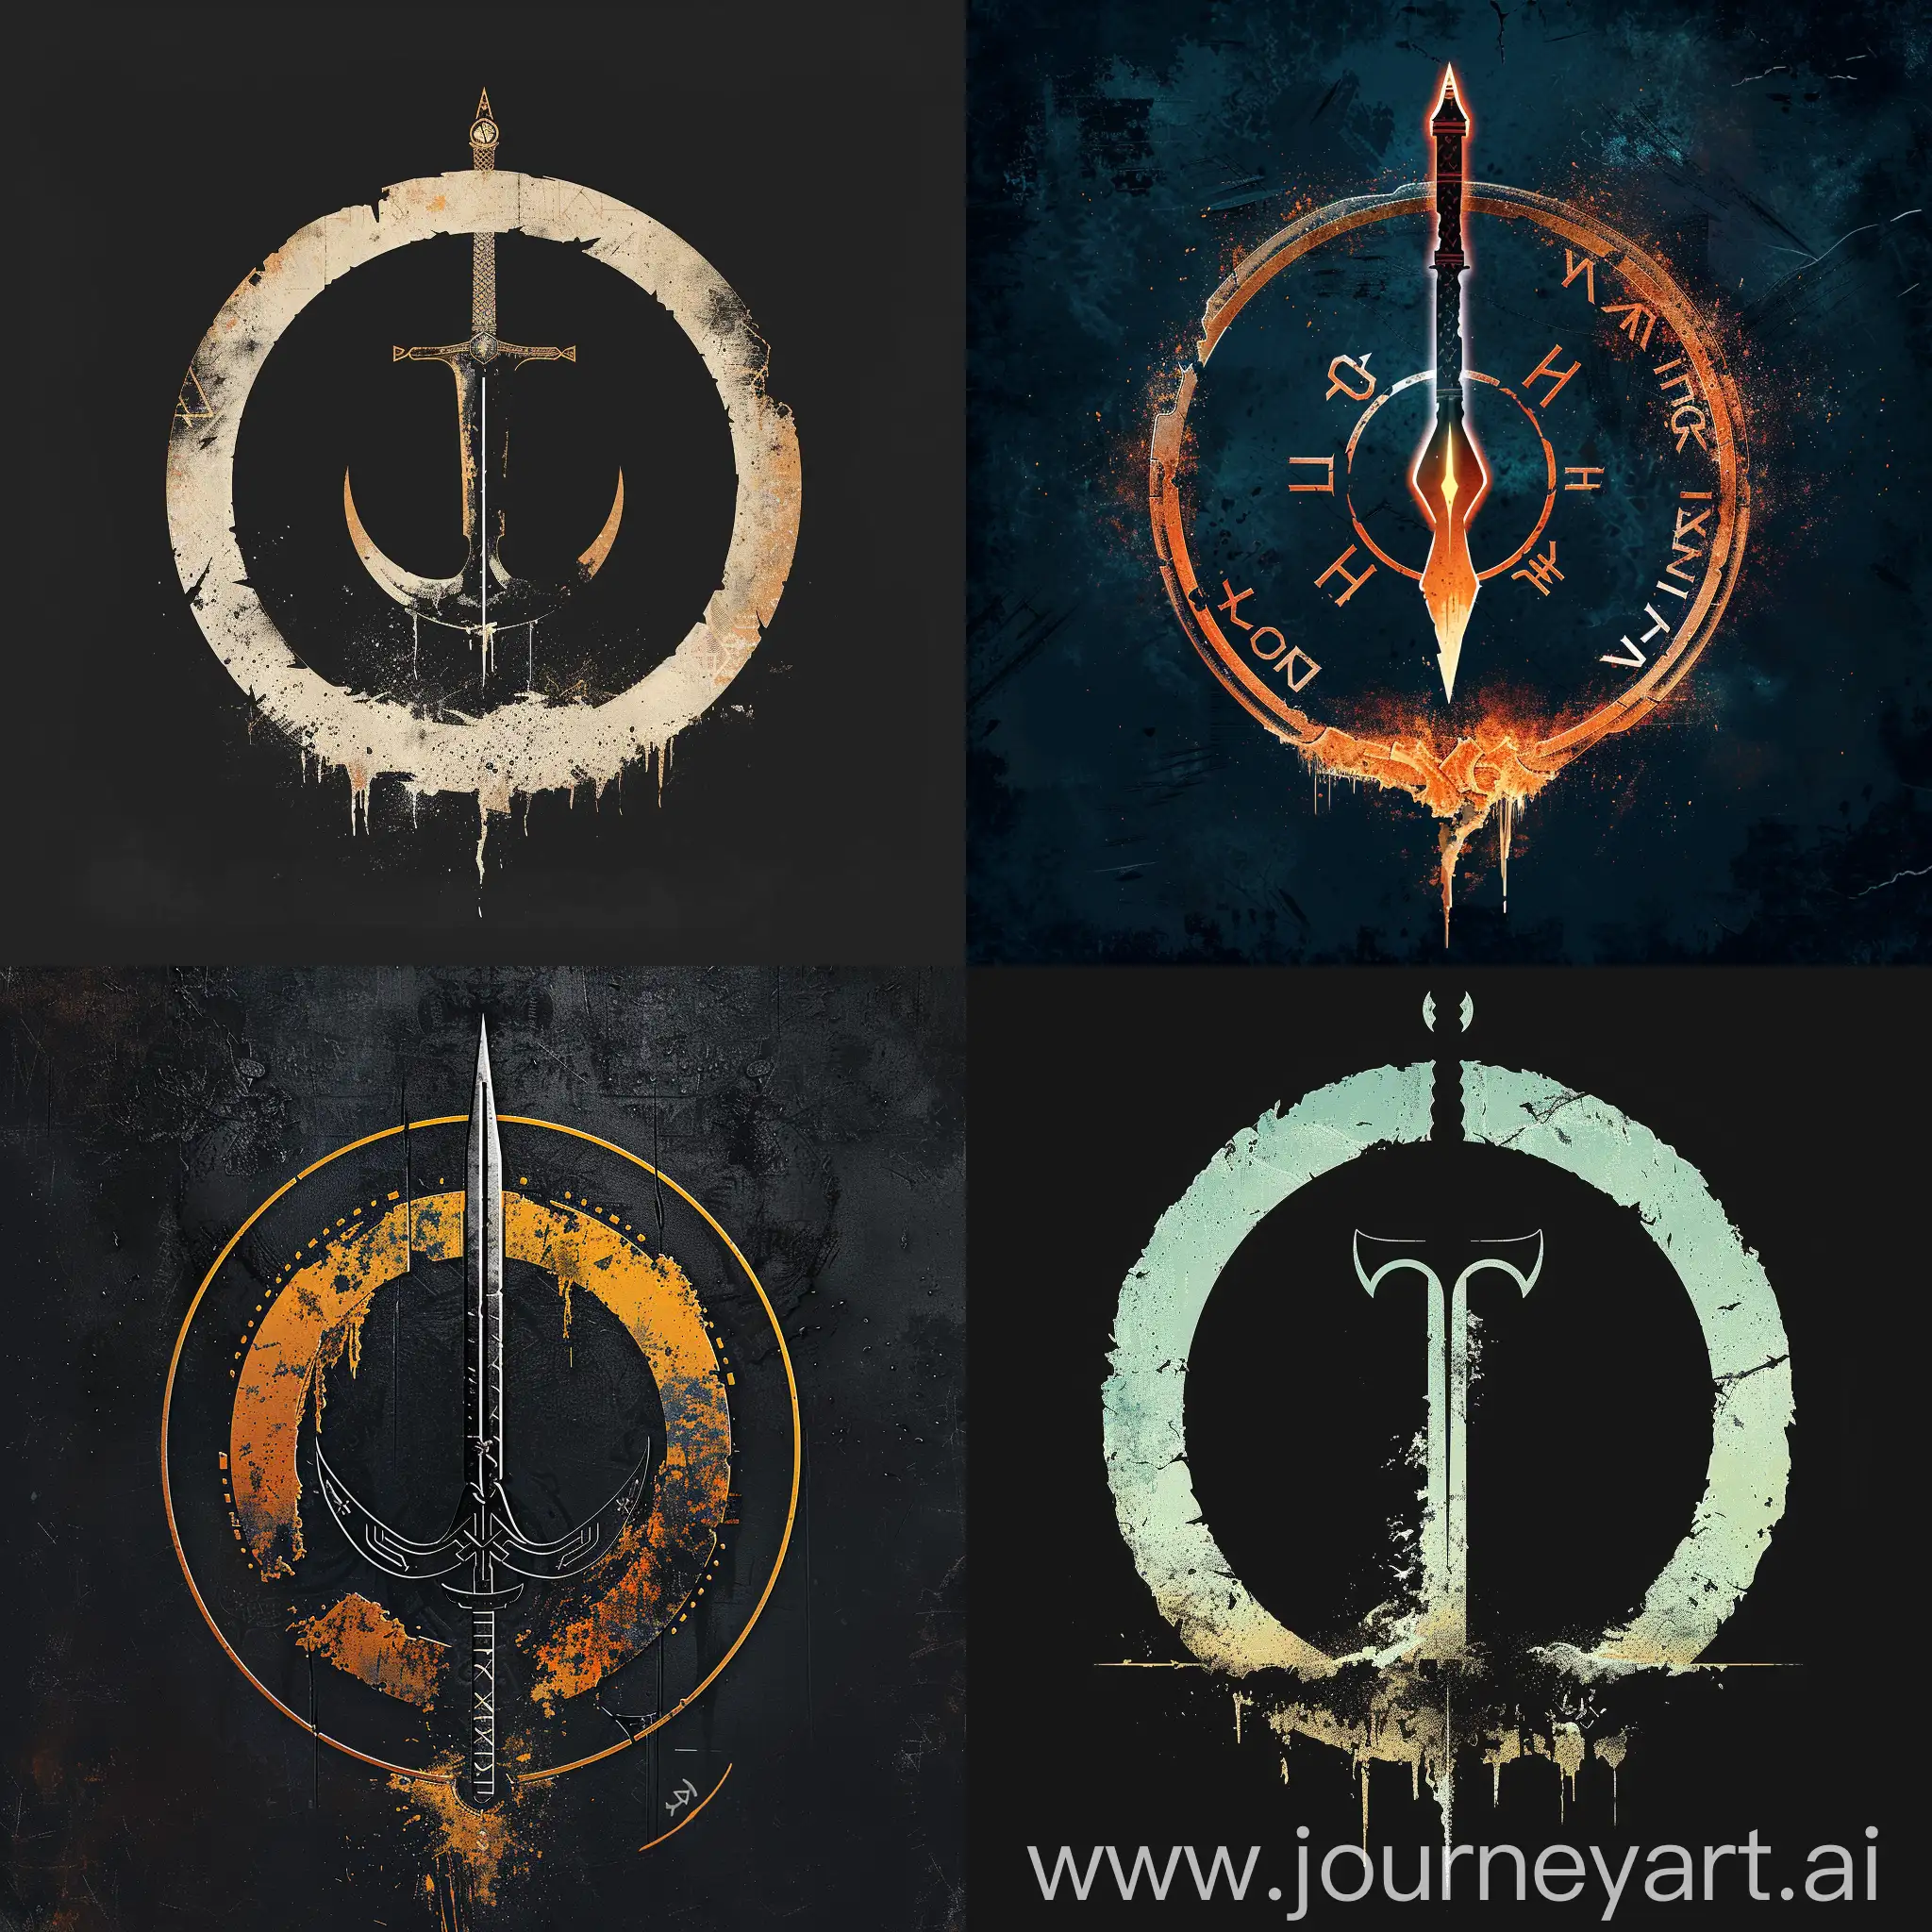 Design a logo for the FPS game "Godslayer," featuring a nordic circle with a futuristic Viking sword piercing through the middle, reminiscent of the Fallout or Elder Scrolls logos, and depict the bottom of the circle as deteriorating.